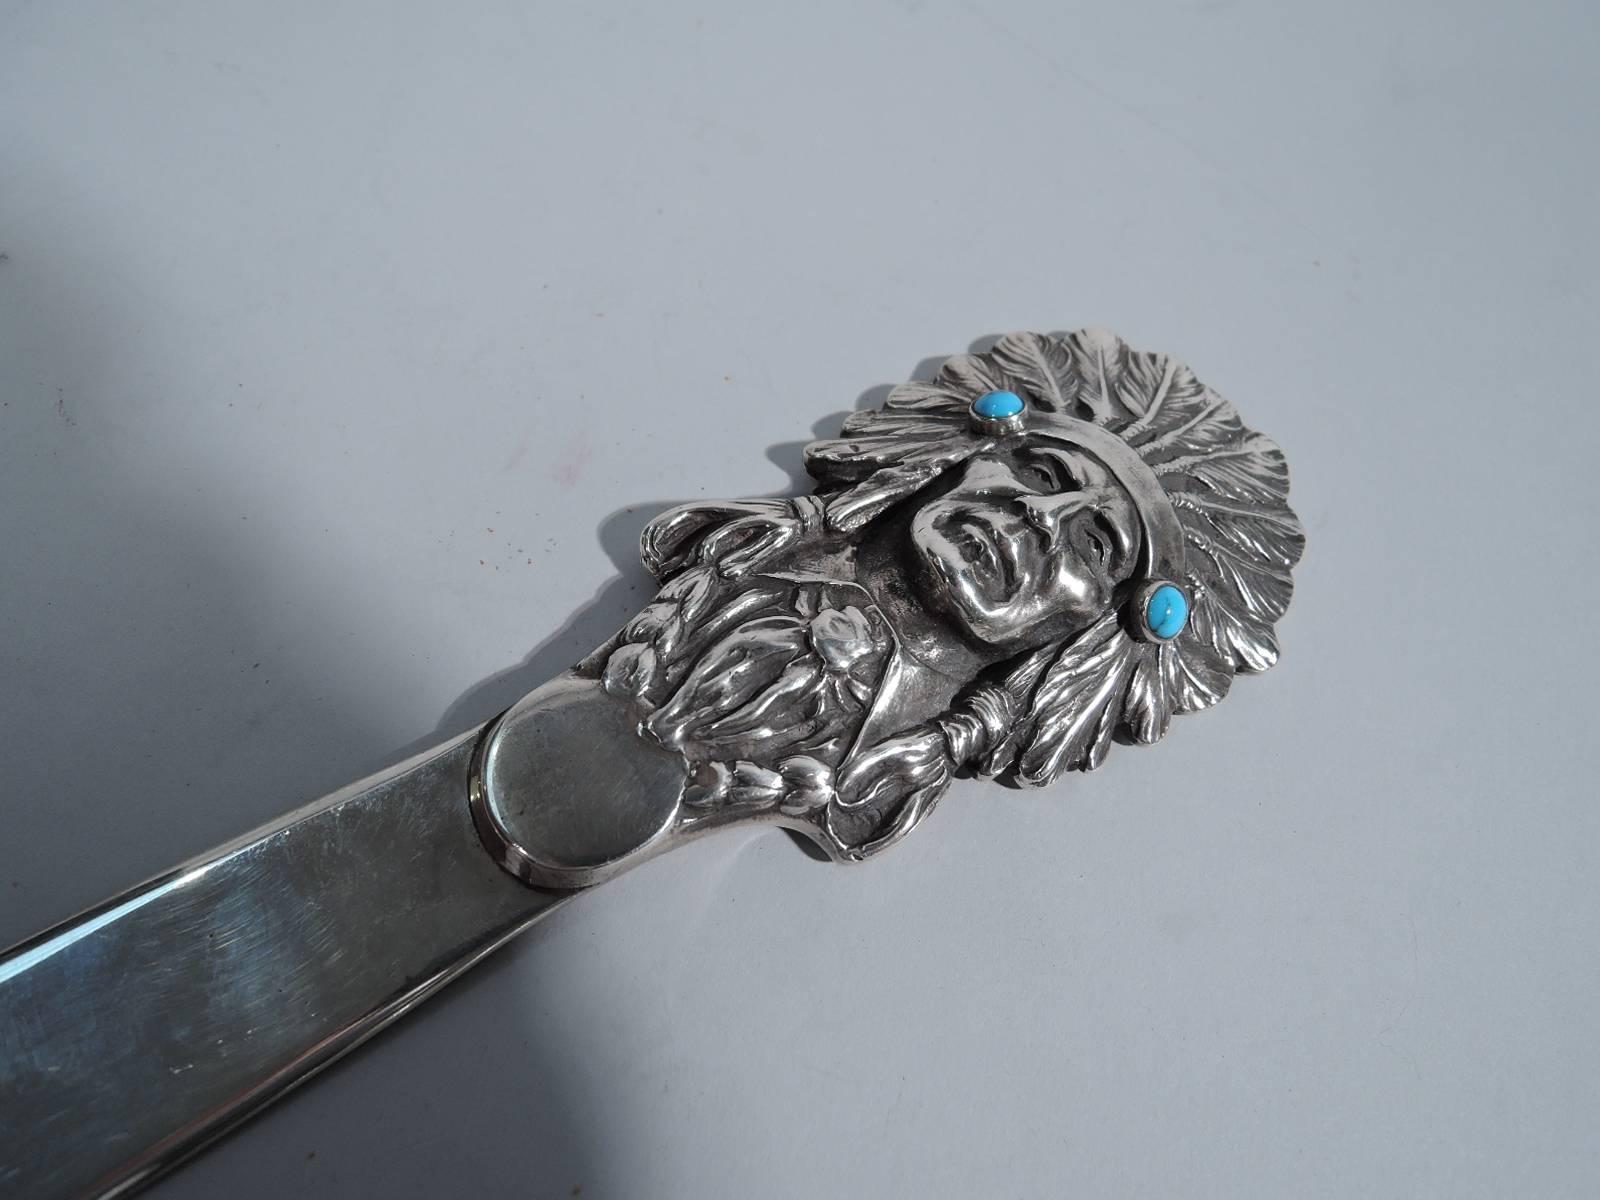 Western sterling silver letter opener. Made by Edward H Bohlin in Hollywood, circa 1930. Cast Indian Chief terminal with feathered headdress embellished with cabochon turquoise beads. On back interlaced script monogram. A great piece by Bohlin, who